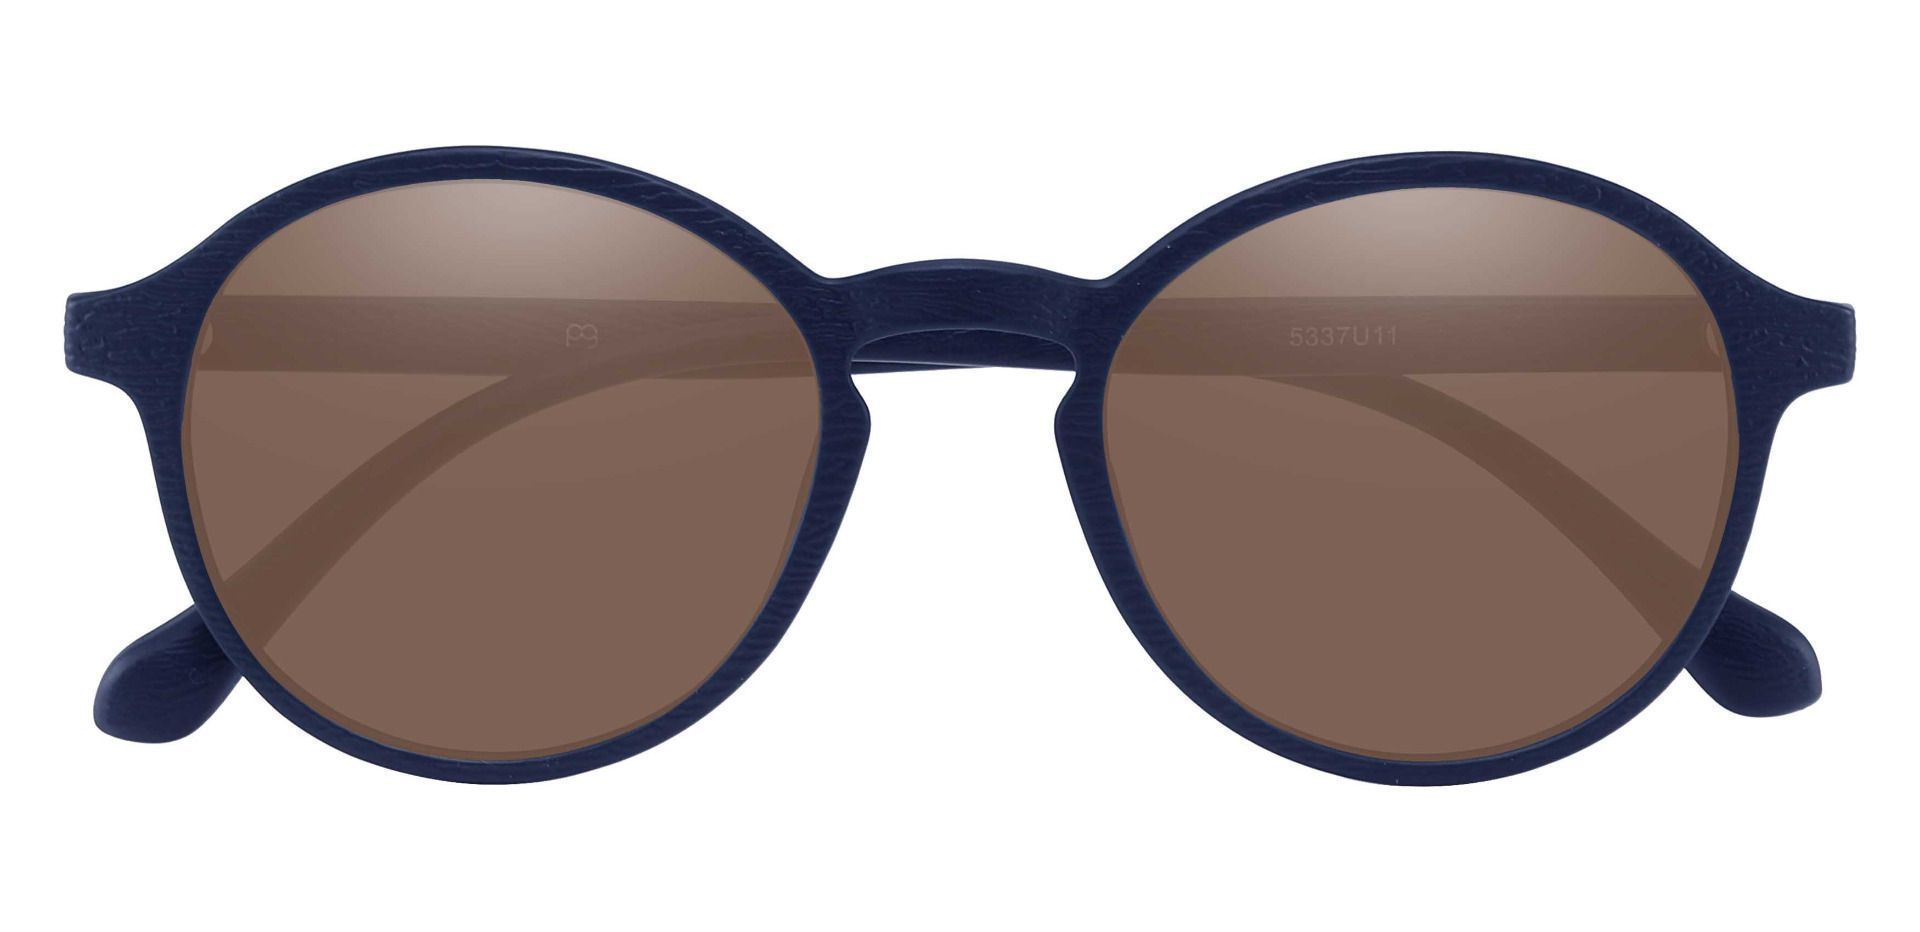 Whitney Round Reading Sunglasses - Blue Frame With Brown Lenses